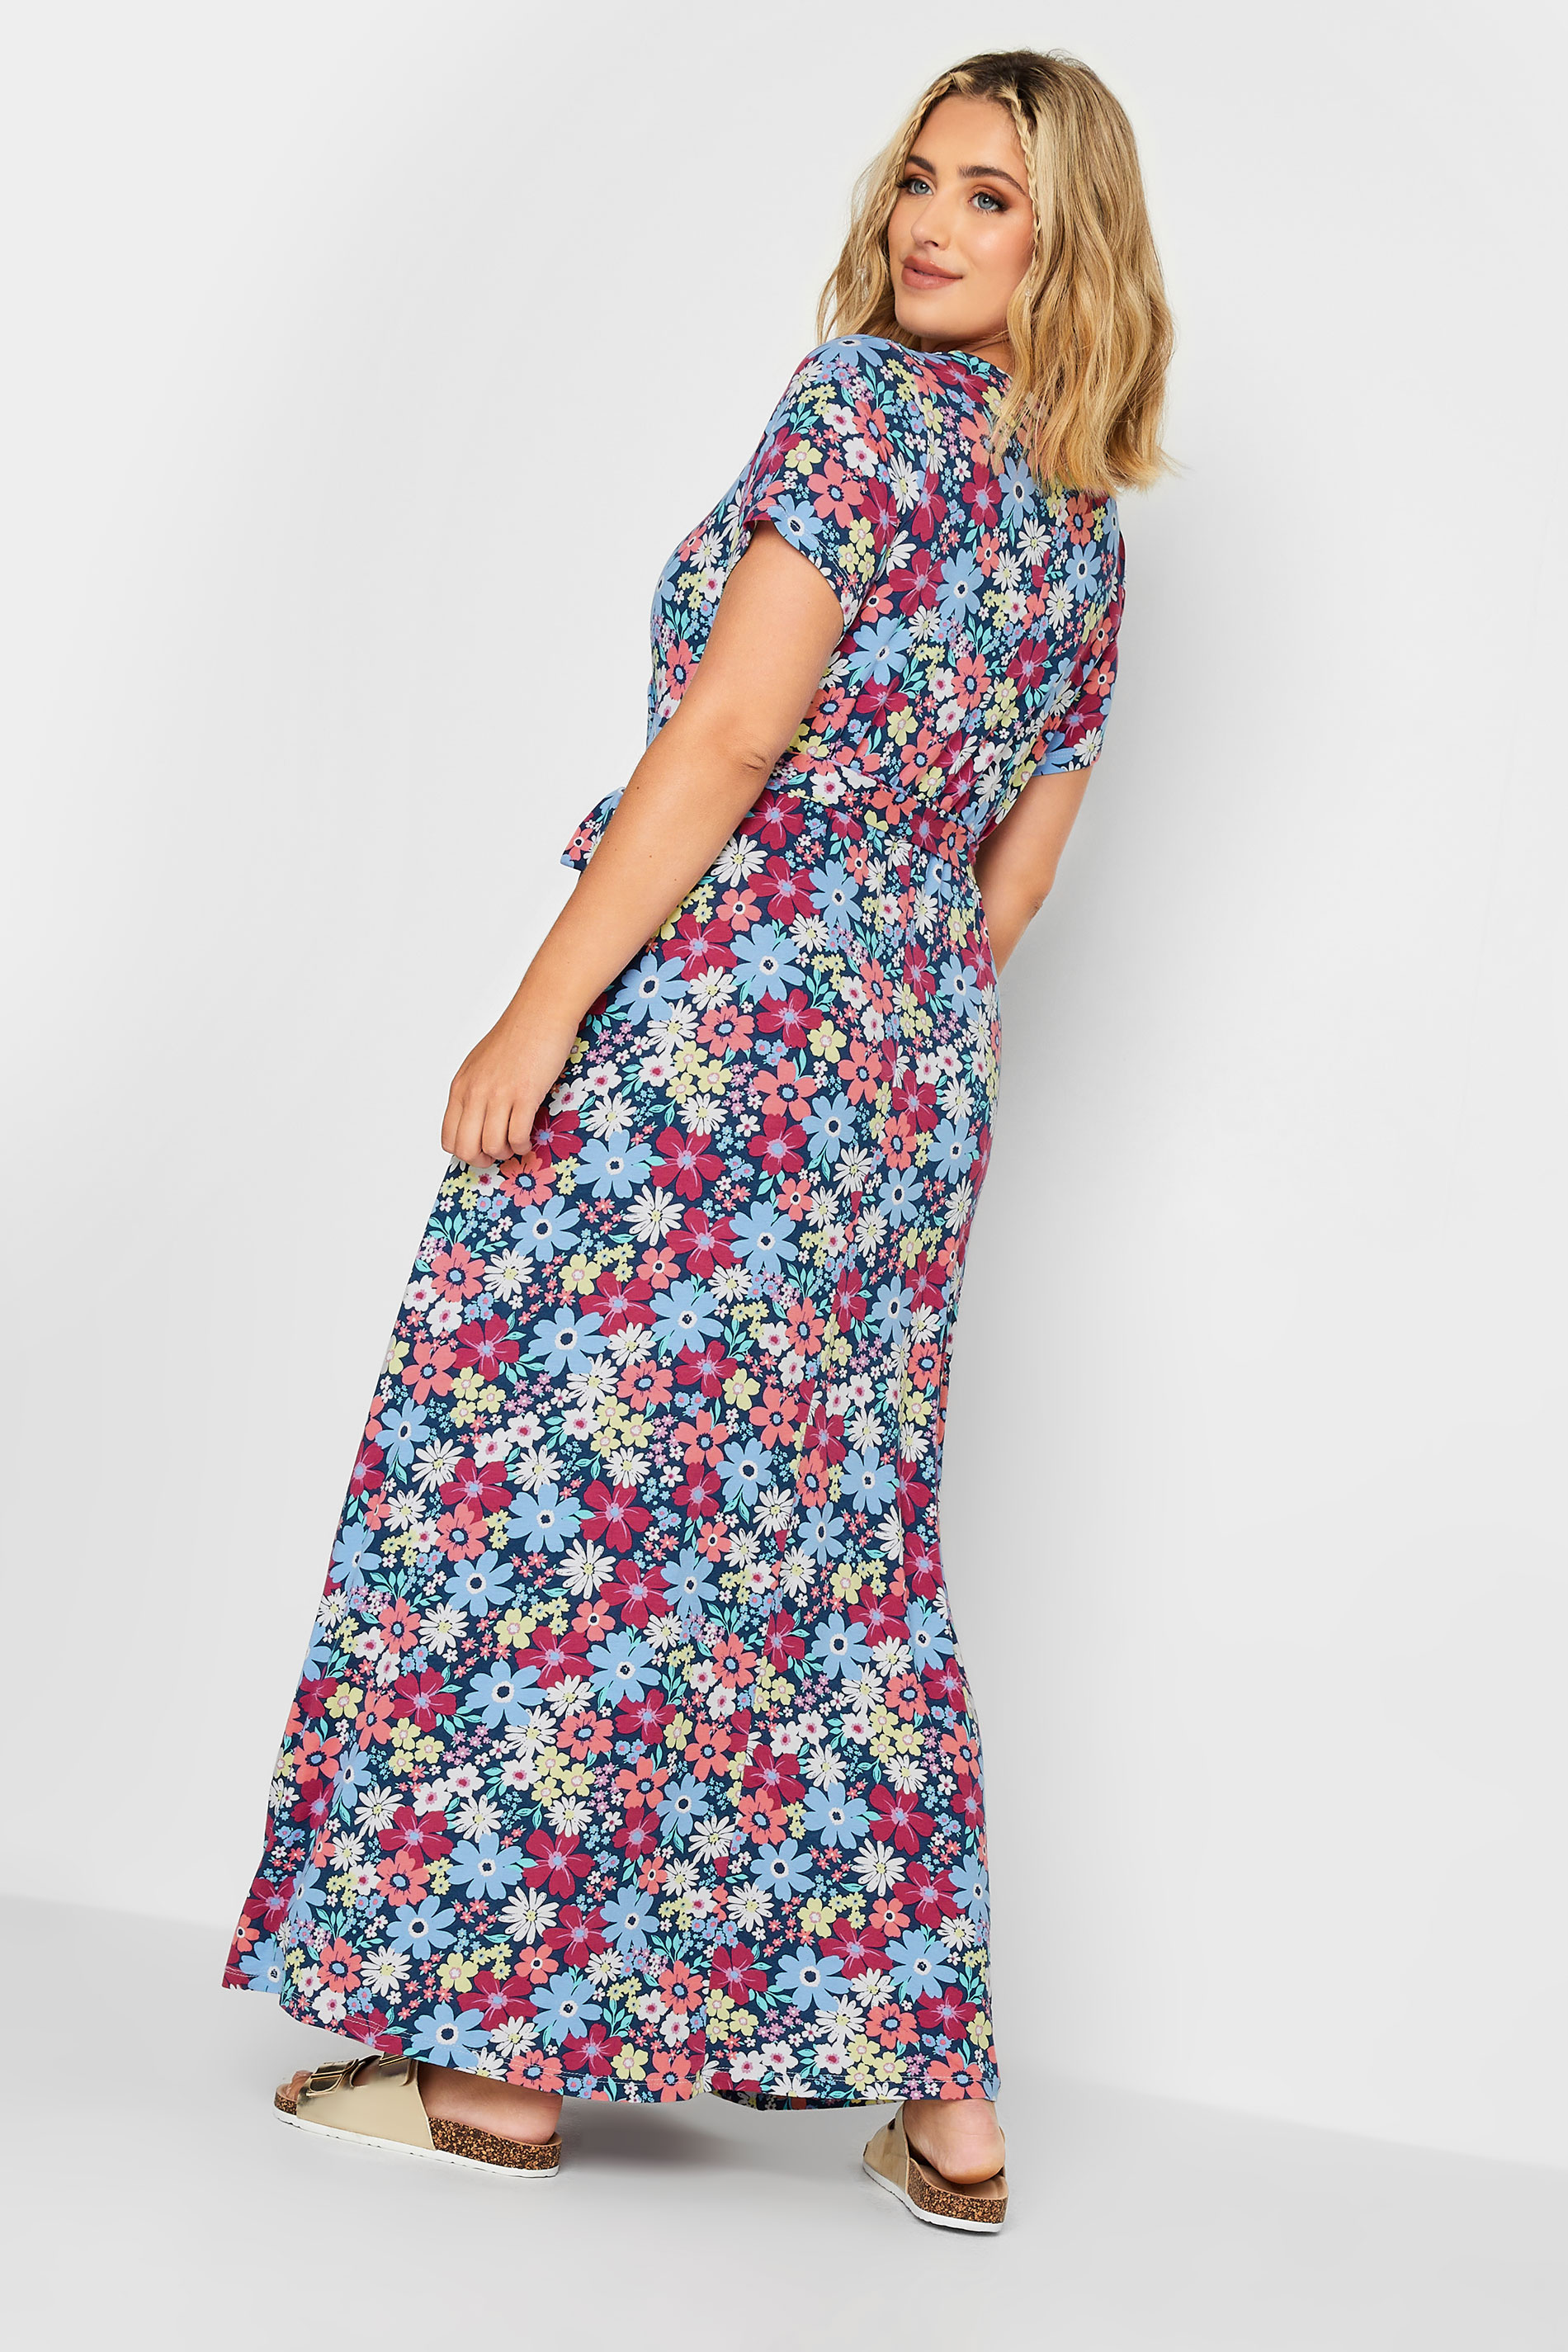 YOURS Curve Plus Size Light Blue Floral Midaxi Dress | Yours Clothing  3